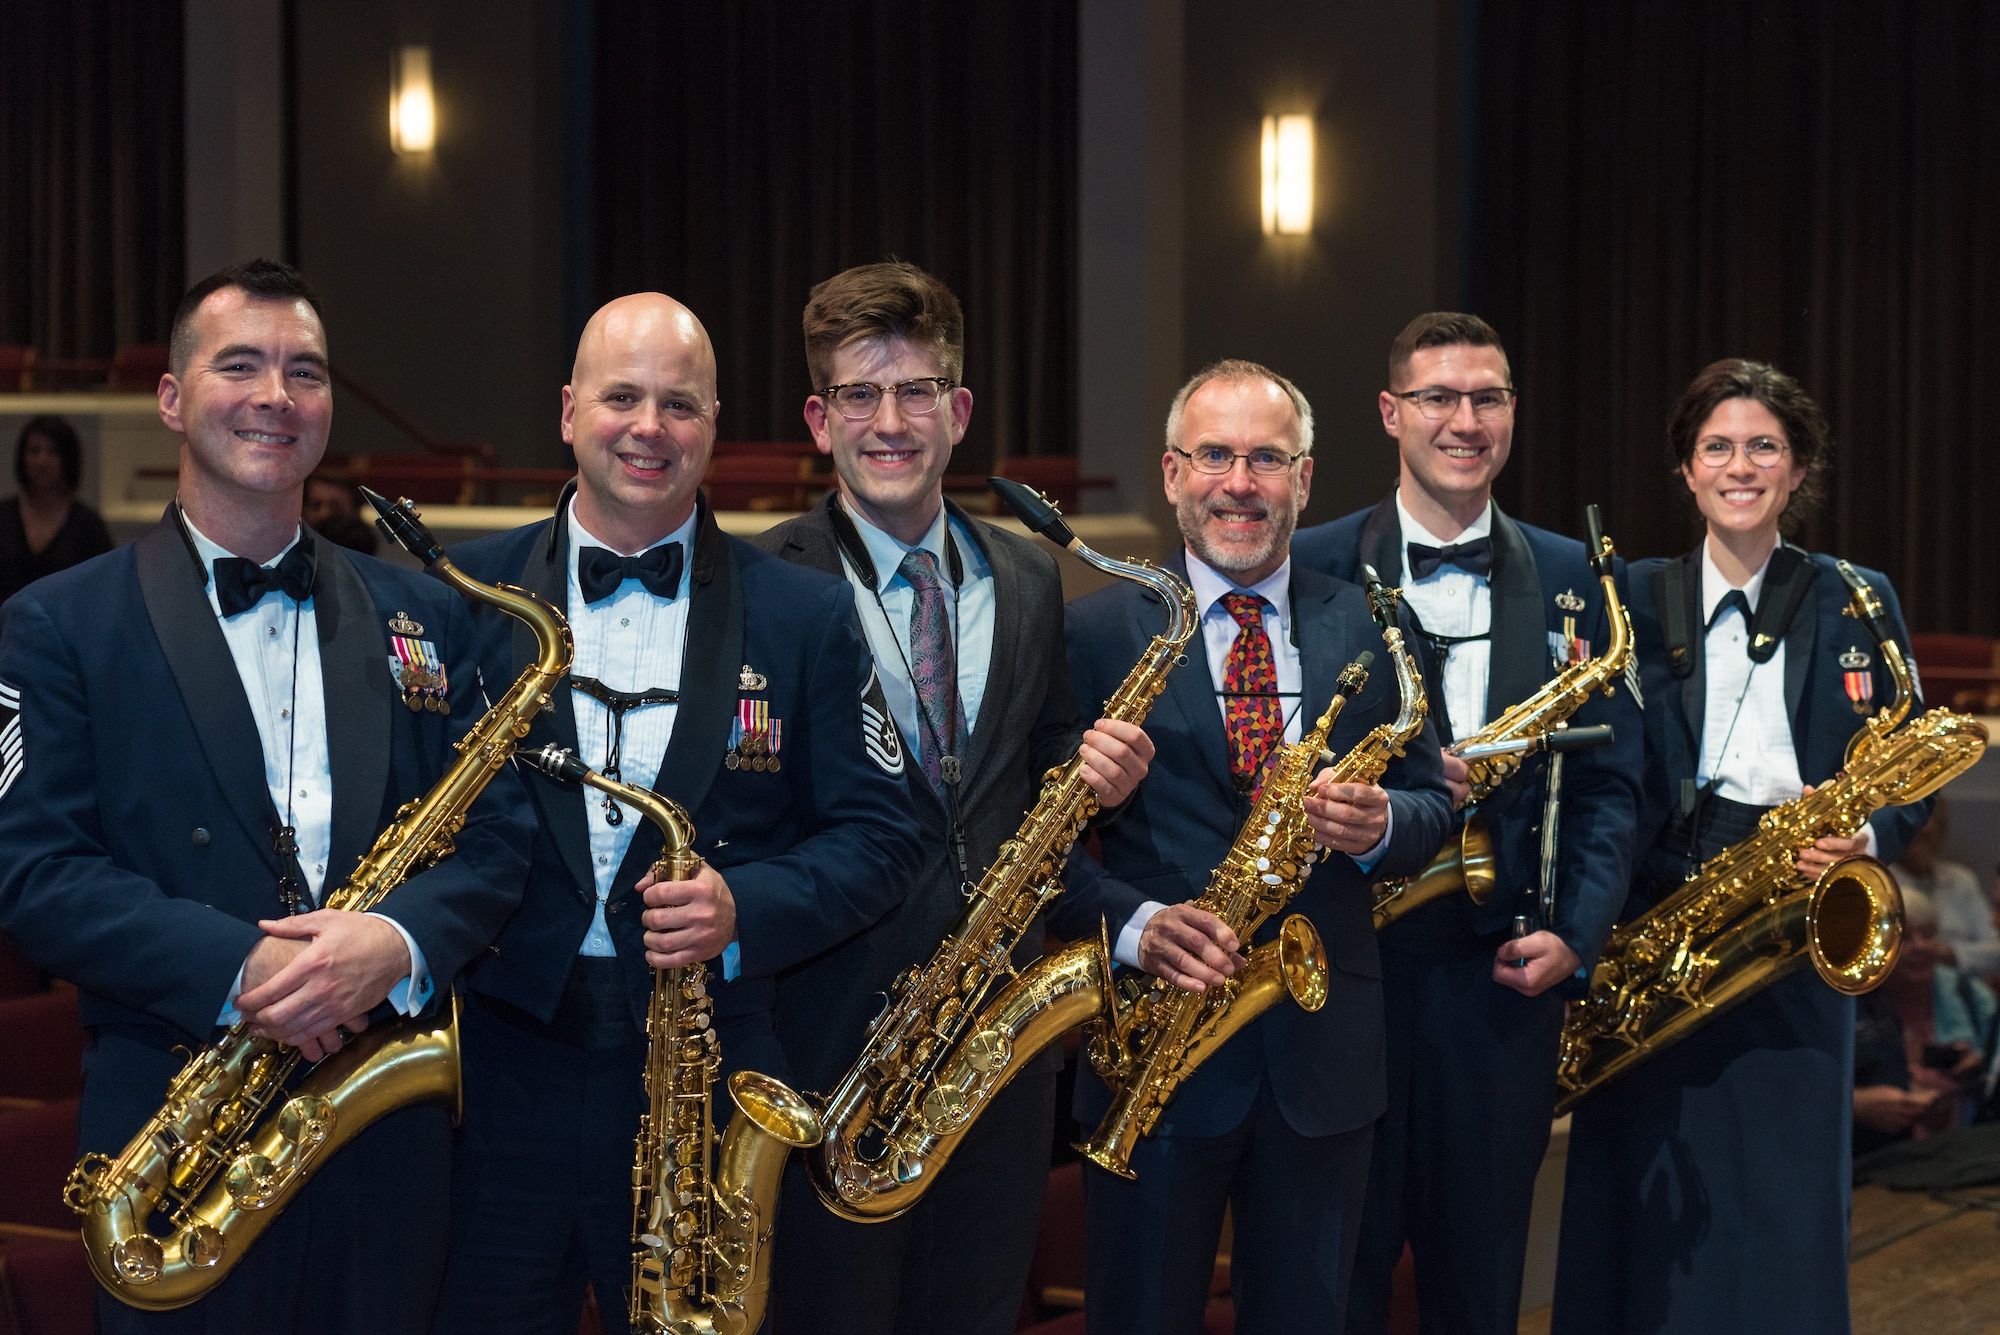 Internationally acclaimed saxophonist Joe Lulloff and his son, Jordan Lulloff, pose with the saxophone section of the U.S. Air Force Concert Band on Thursday, Apr. 18, at the Rachel M. Schlesinger Concert Hall and Arts Center in Alexandria, Virginia. Joe Lulloff and Jordan Lulloff performed on the final installment of The U.S. Air Force Band's 2019 Guest Artist Series. (U.S. Air Force photo by Master Sgt. Grant Langford)